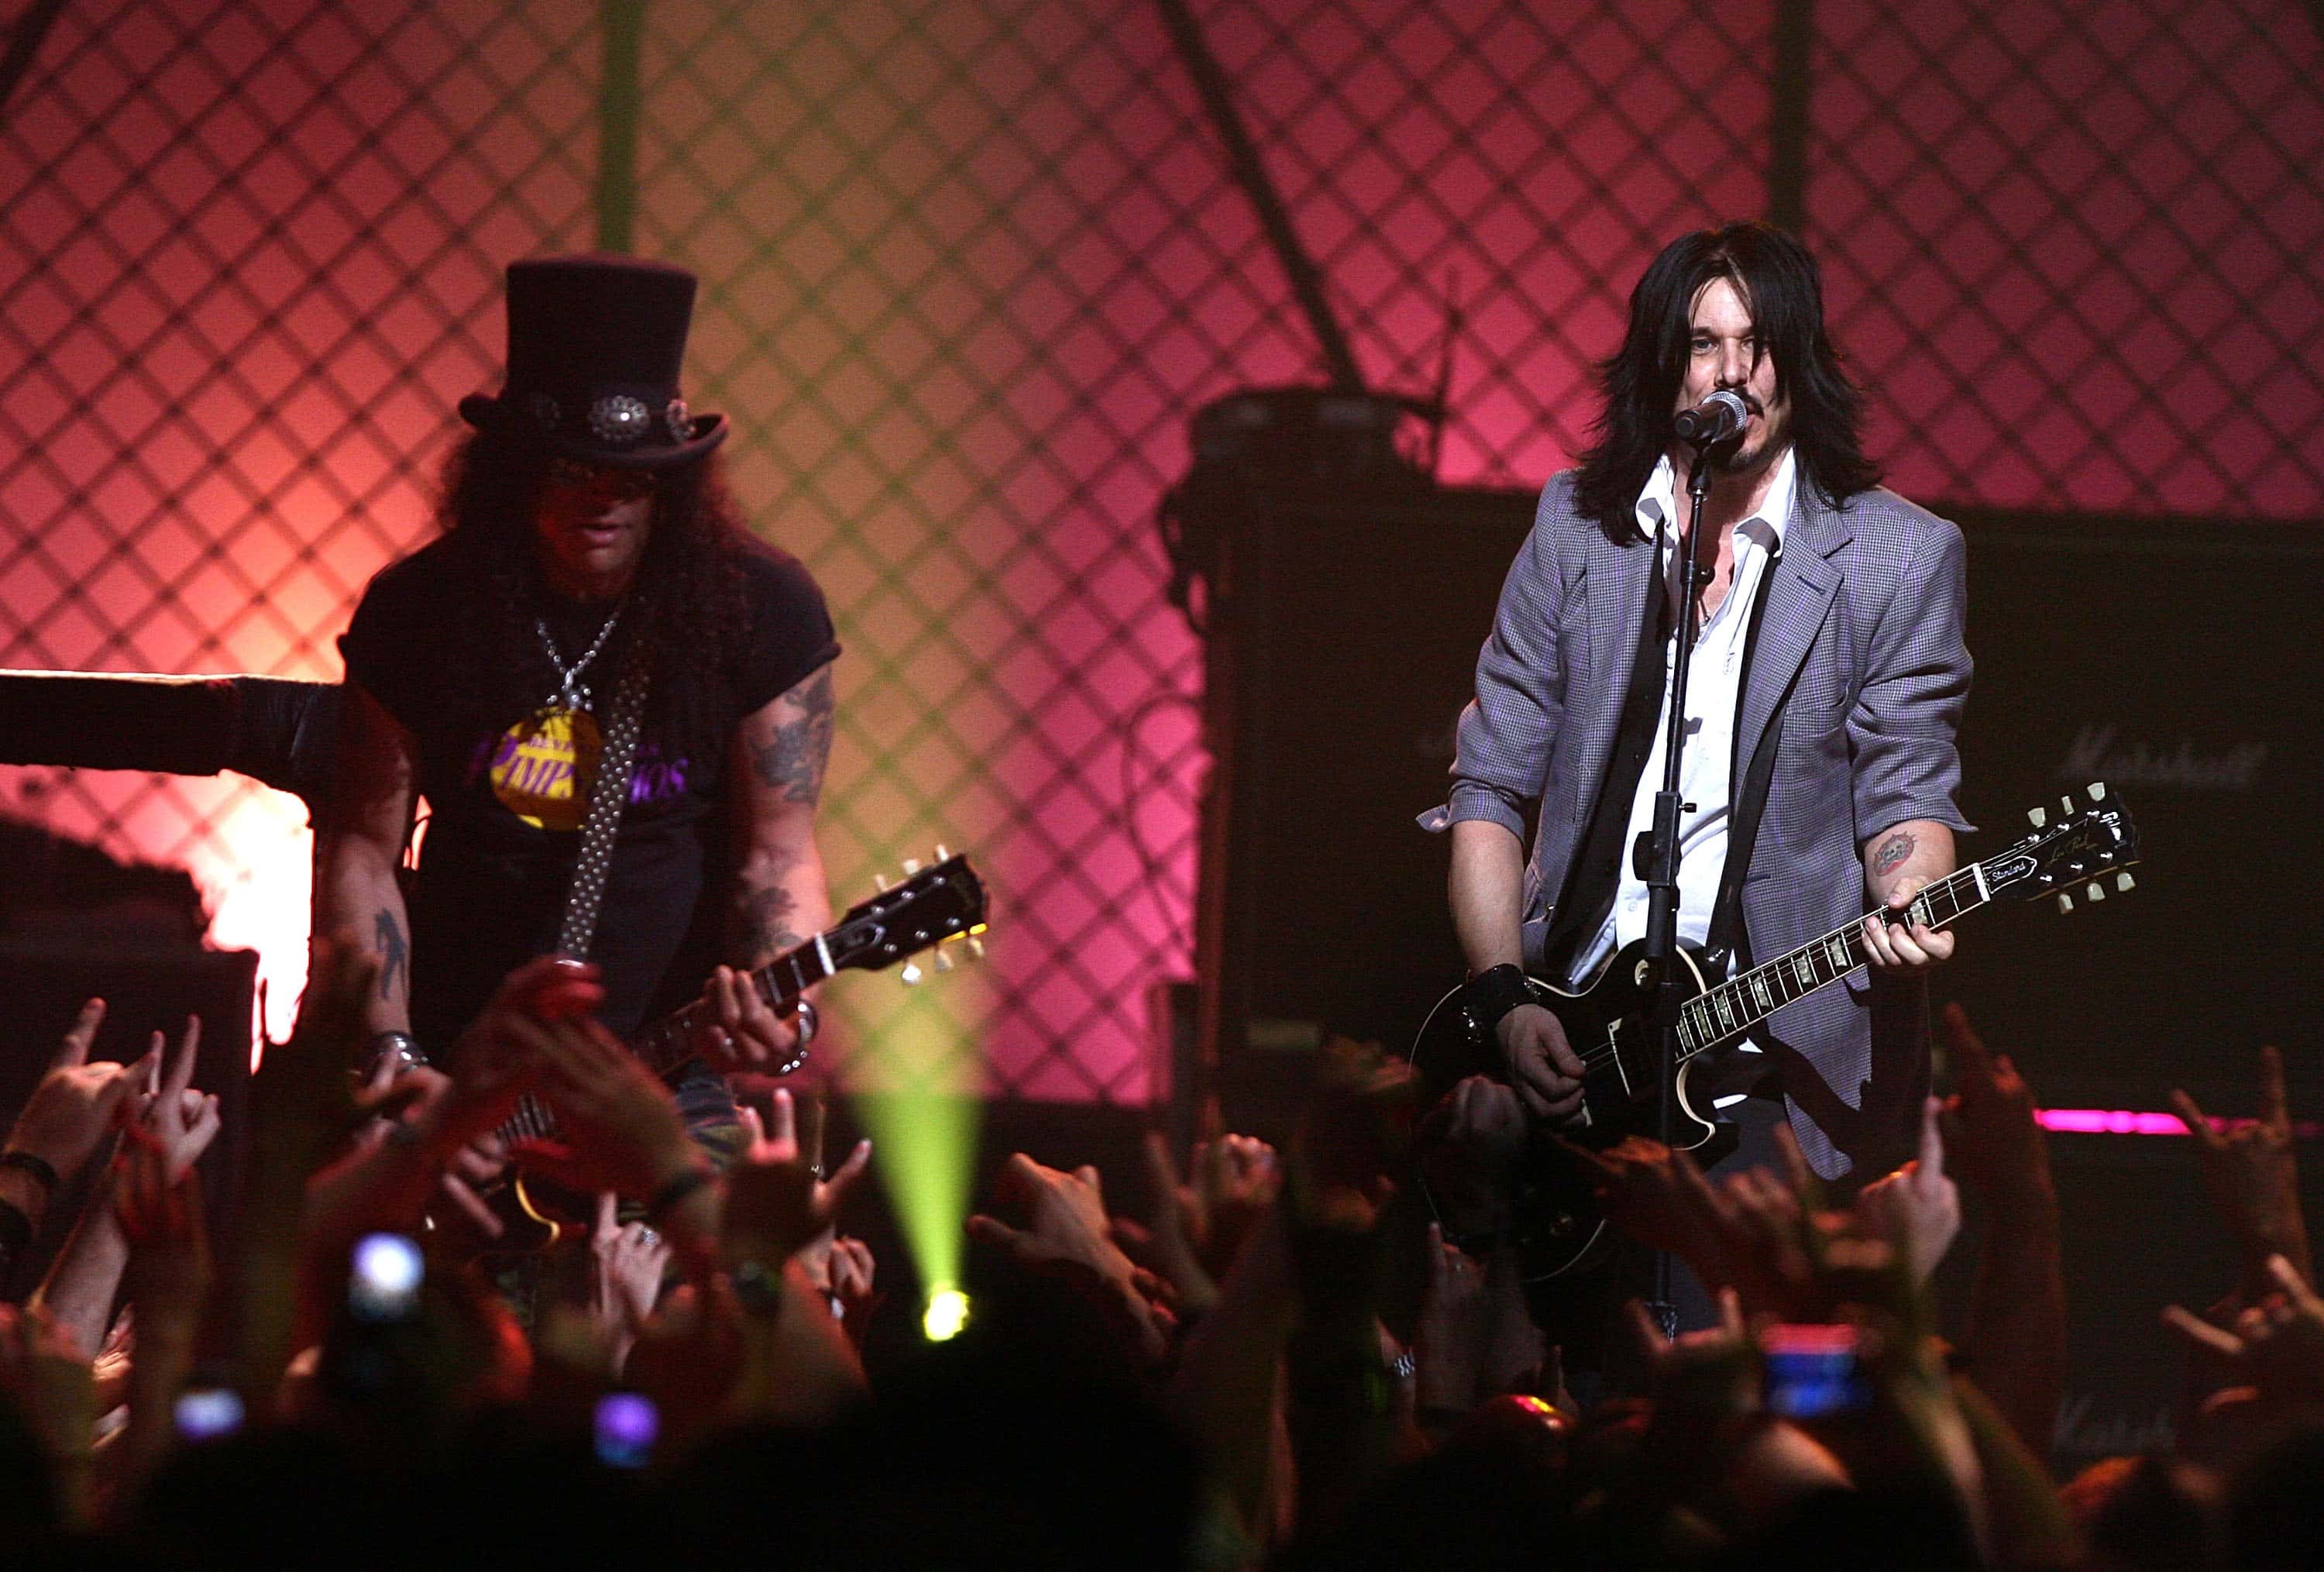 <p>One alleged reason for Slash and Gilby Clarke’s departures from Guns N’ Roses was the rift which deepened while the band was recording a cover of “Sympathy for the Devil” as part of the <em>Interview with a Vampire</em> soundtrack. Allegedly, Axl Rose infuriated Slash by insisting he continually re-record his part until it was a virtual copy of Keith Richards’ version. Clarke, meanwhile, claimed that nobody asked him to work on the song with them, and he took that as a sign that he was on his way out the door.</p>